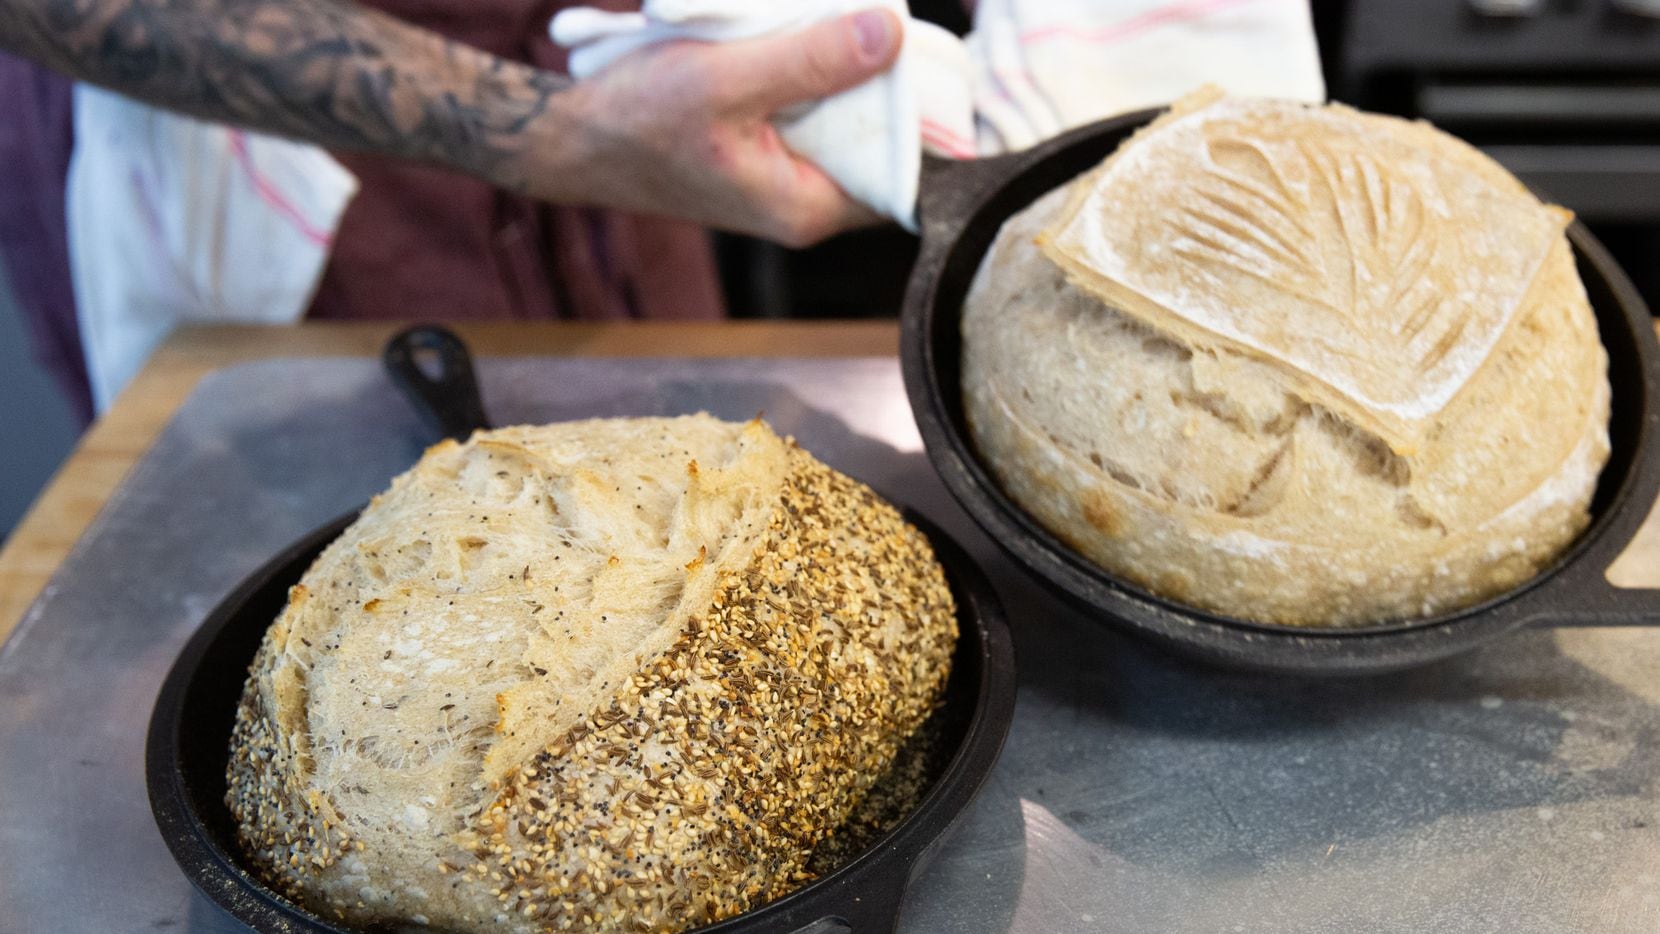 Matt Bresnan, head chef at Food Company, removes two loaves of bread in the Nonna kitchen in Highland Park in Dallas on Monday, July 1, 2019. Bresnan is breaking out with his own business called Bresnan Bread and Pastry and will eventually be opening his own bakery. (Lynda M. Gonzalez/The Dallas Morning News)